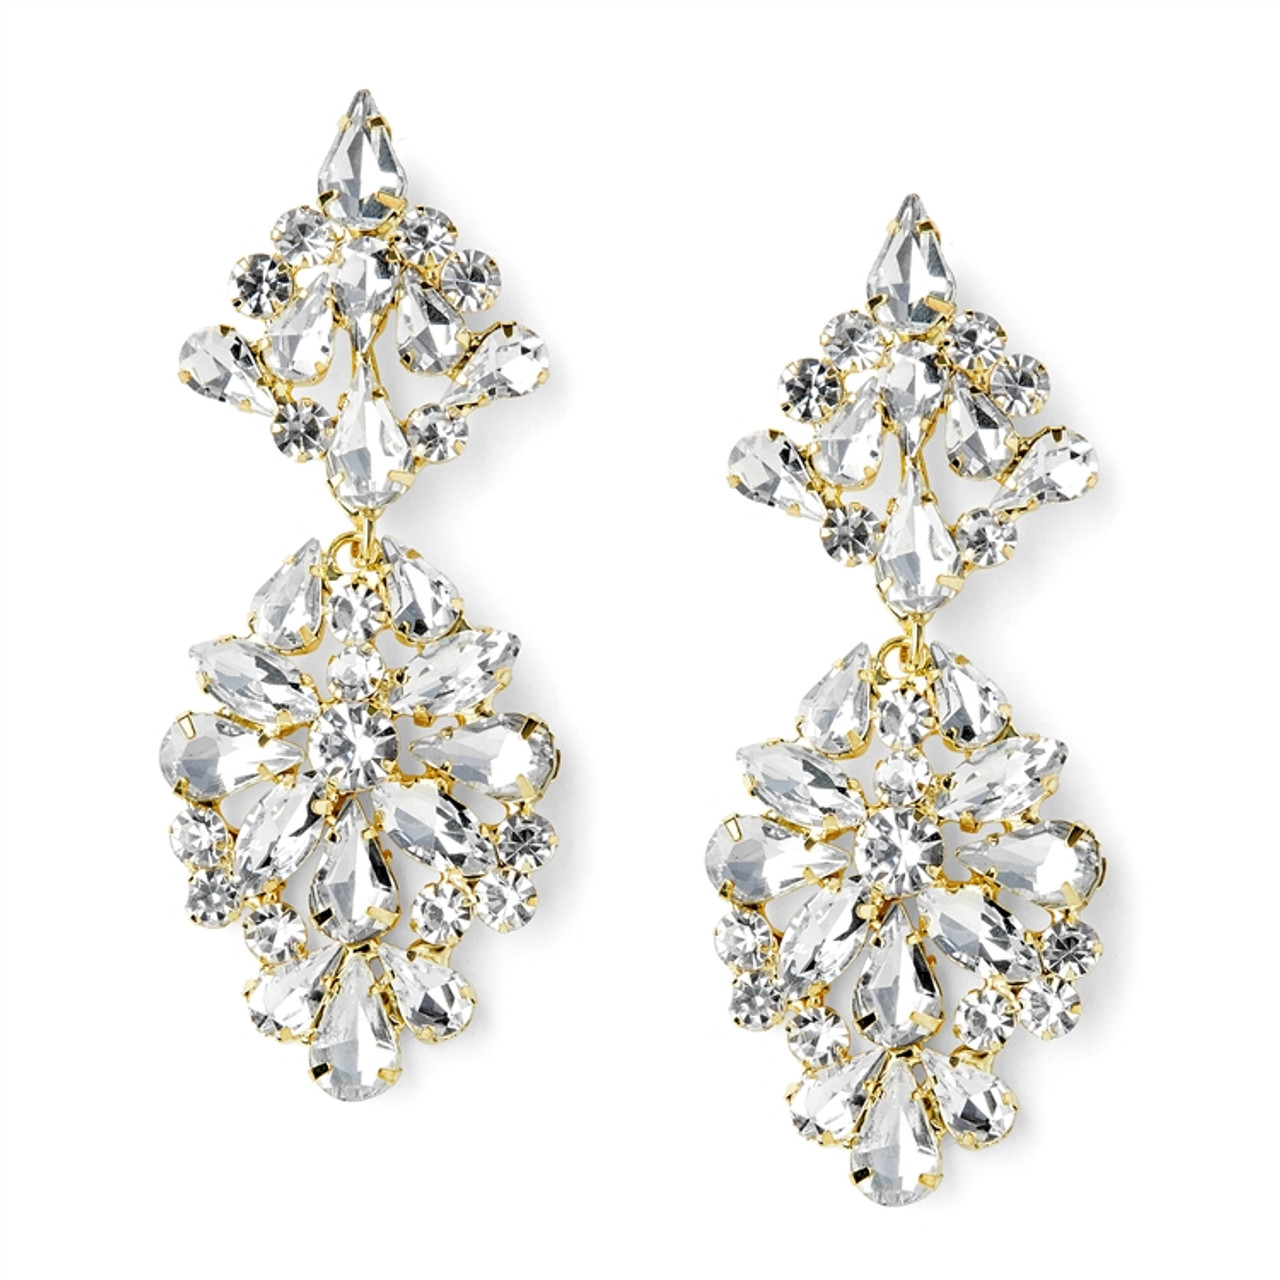 Gold Crystal Statement Earrings for Weddings or Prom - Fabulous Lightweight Design 4639E-G